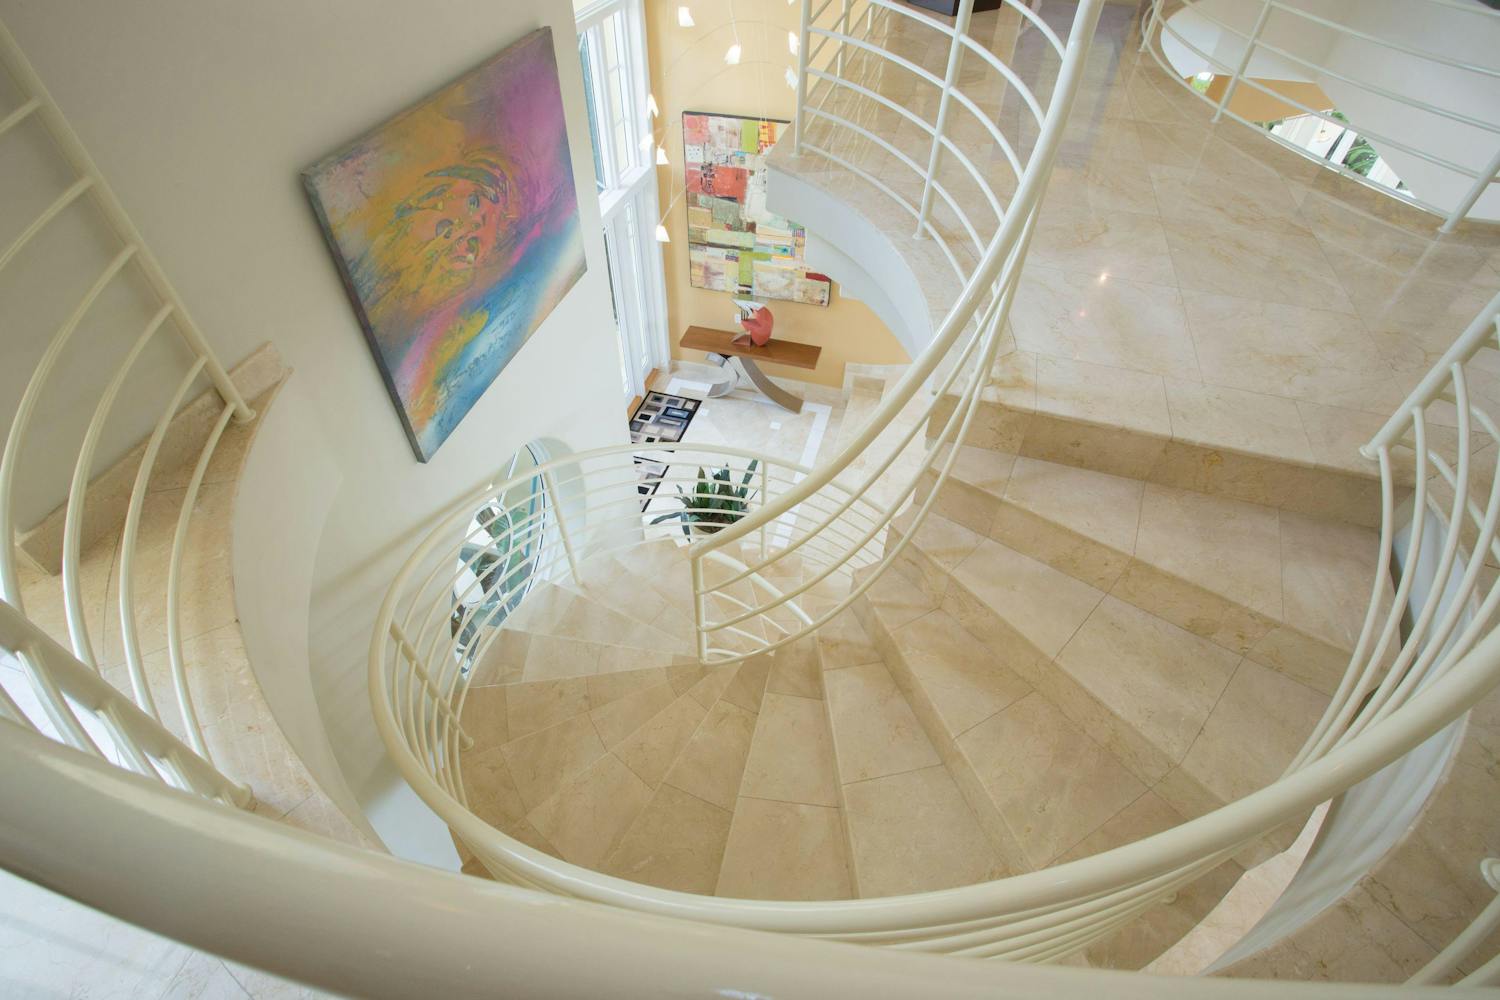 Aerial view of a spiral staircaise with a tiled floor